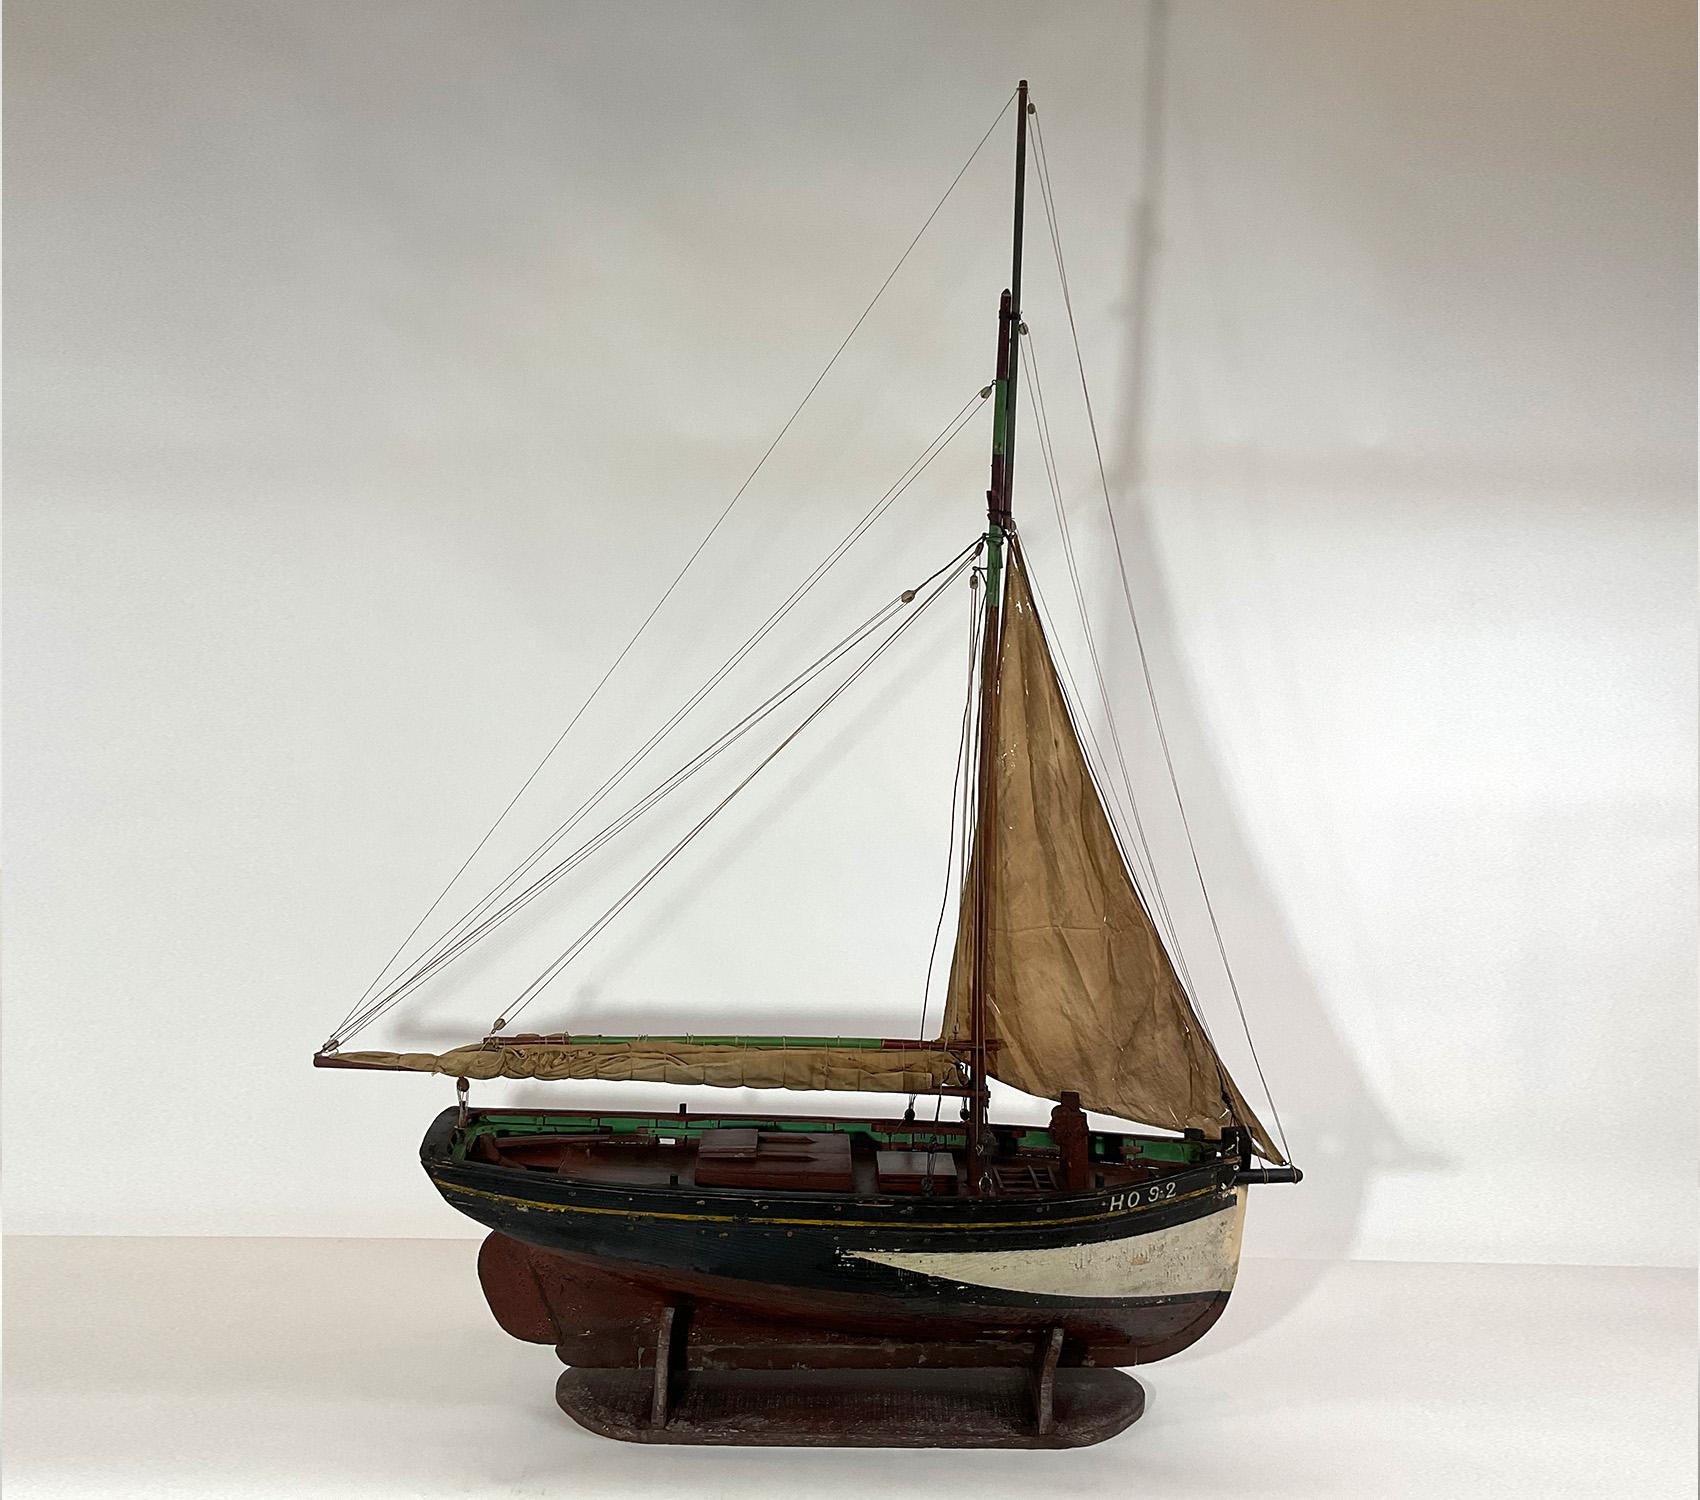 Antique model of the French fishing vessel Delphine Paulette. Hail port is hard to read due to old age splits. The hull is in its old paint. Furled sail. Big boat with a lot of character. A long seine net is on deck. Early twentieth century, the